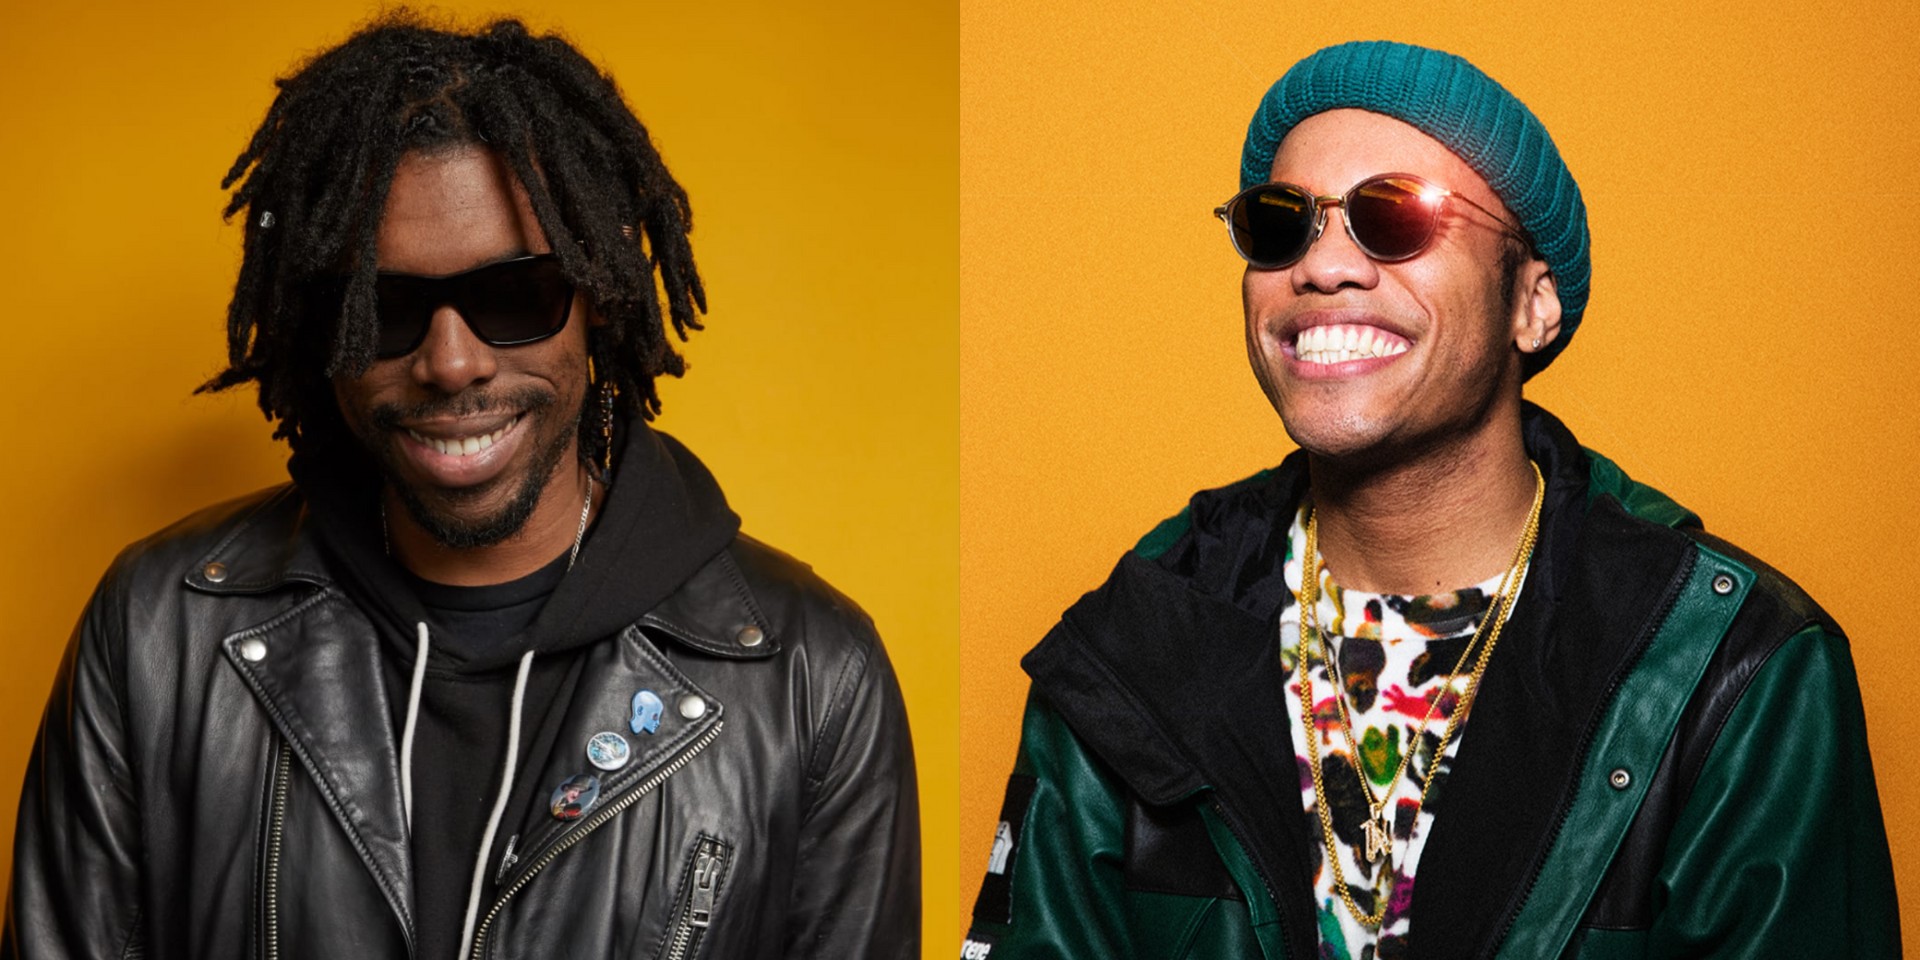 Flying Lotus releases new single with Anderson .Paak, 'More' – Listen